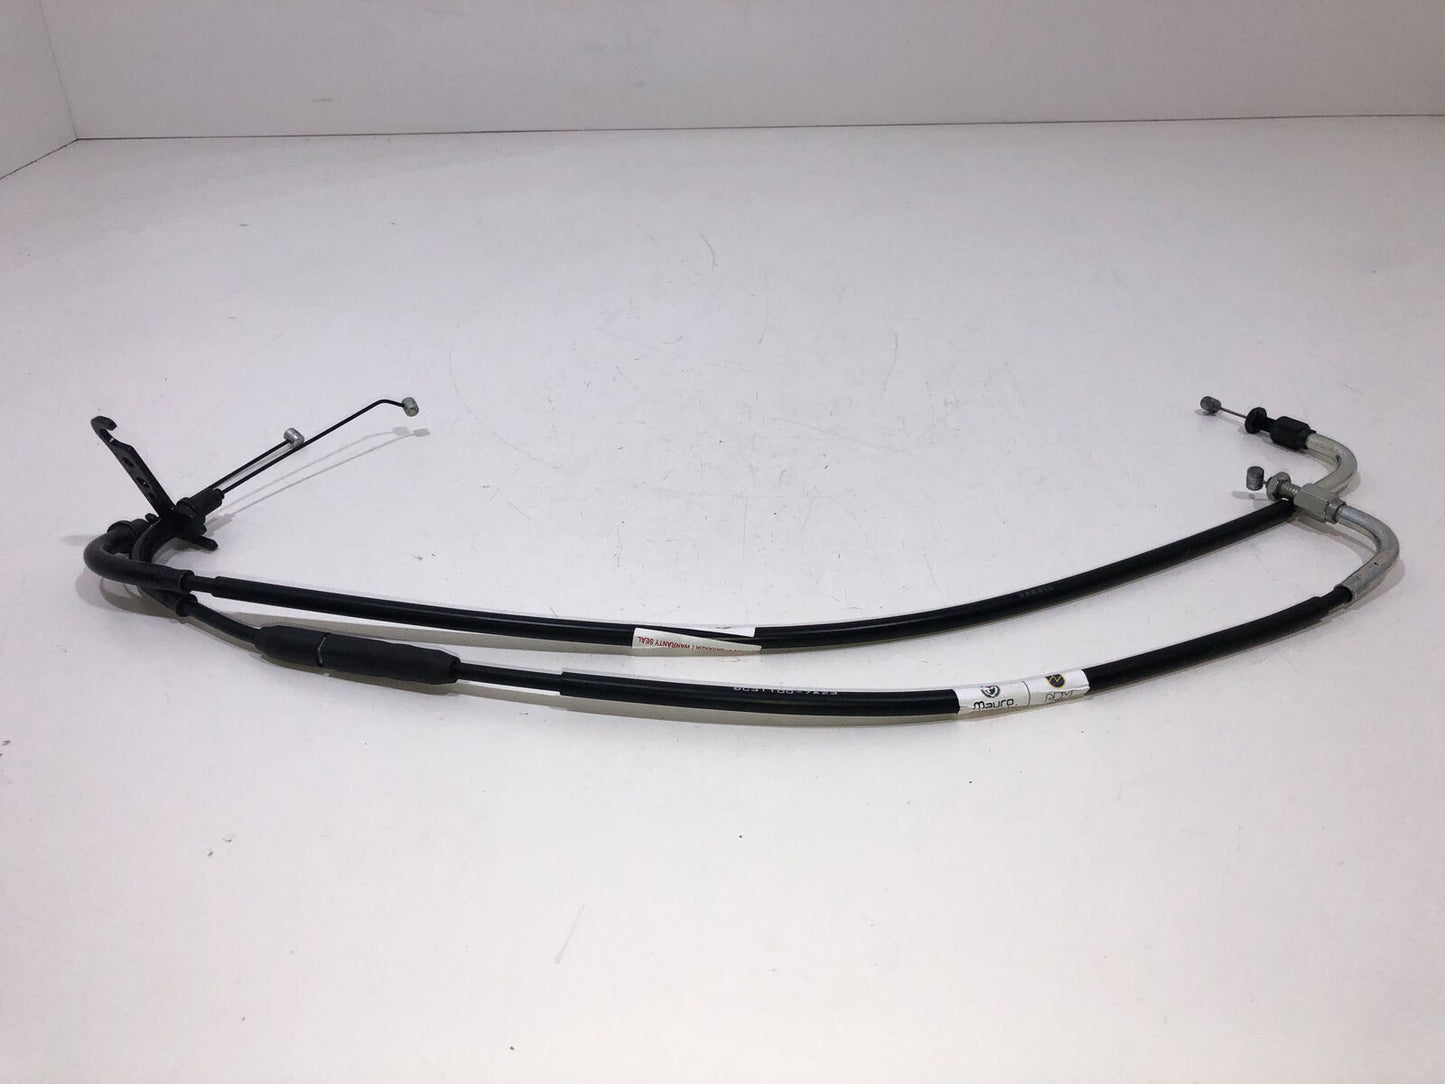 Throttle Cables YAMAHA T-MAX 530 SX 2017 Cable Tube Steel Shot Tubes